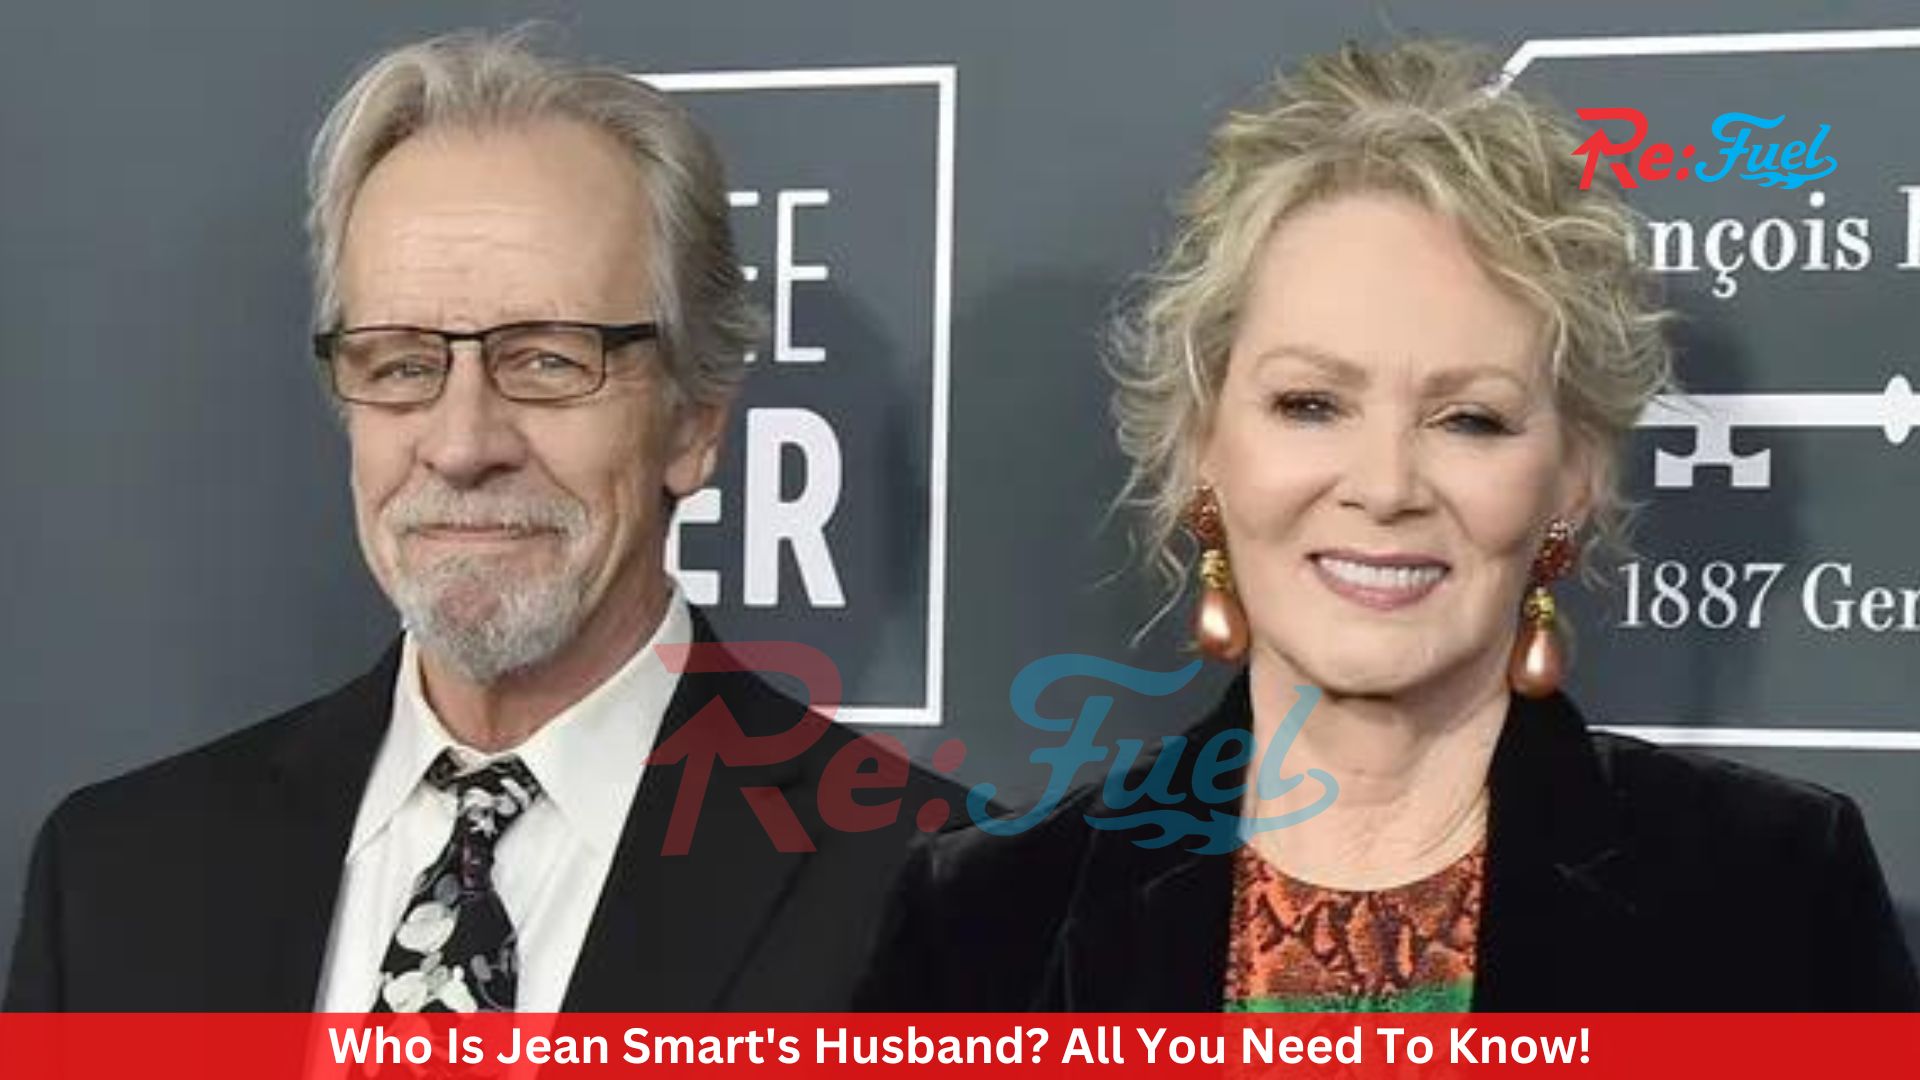 Who Is Jean Smart's Husband? All You Need To Know!